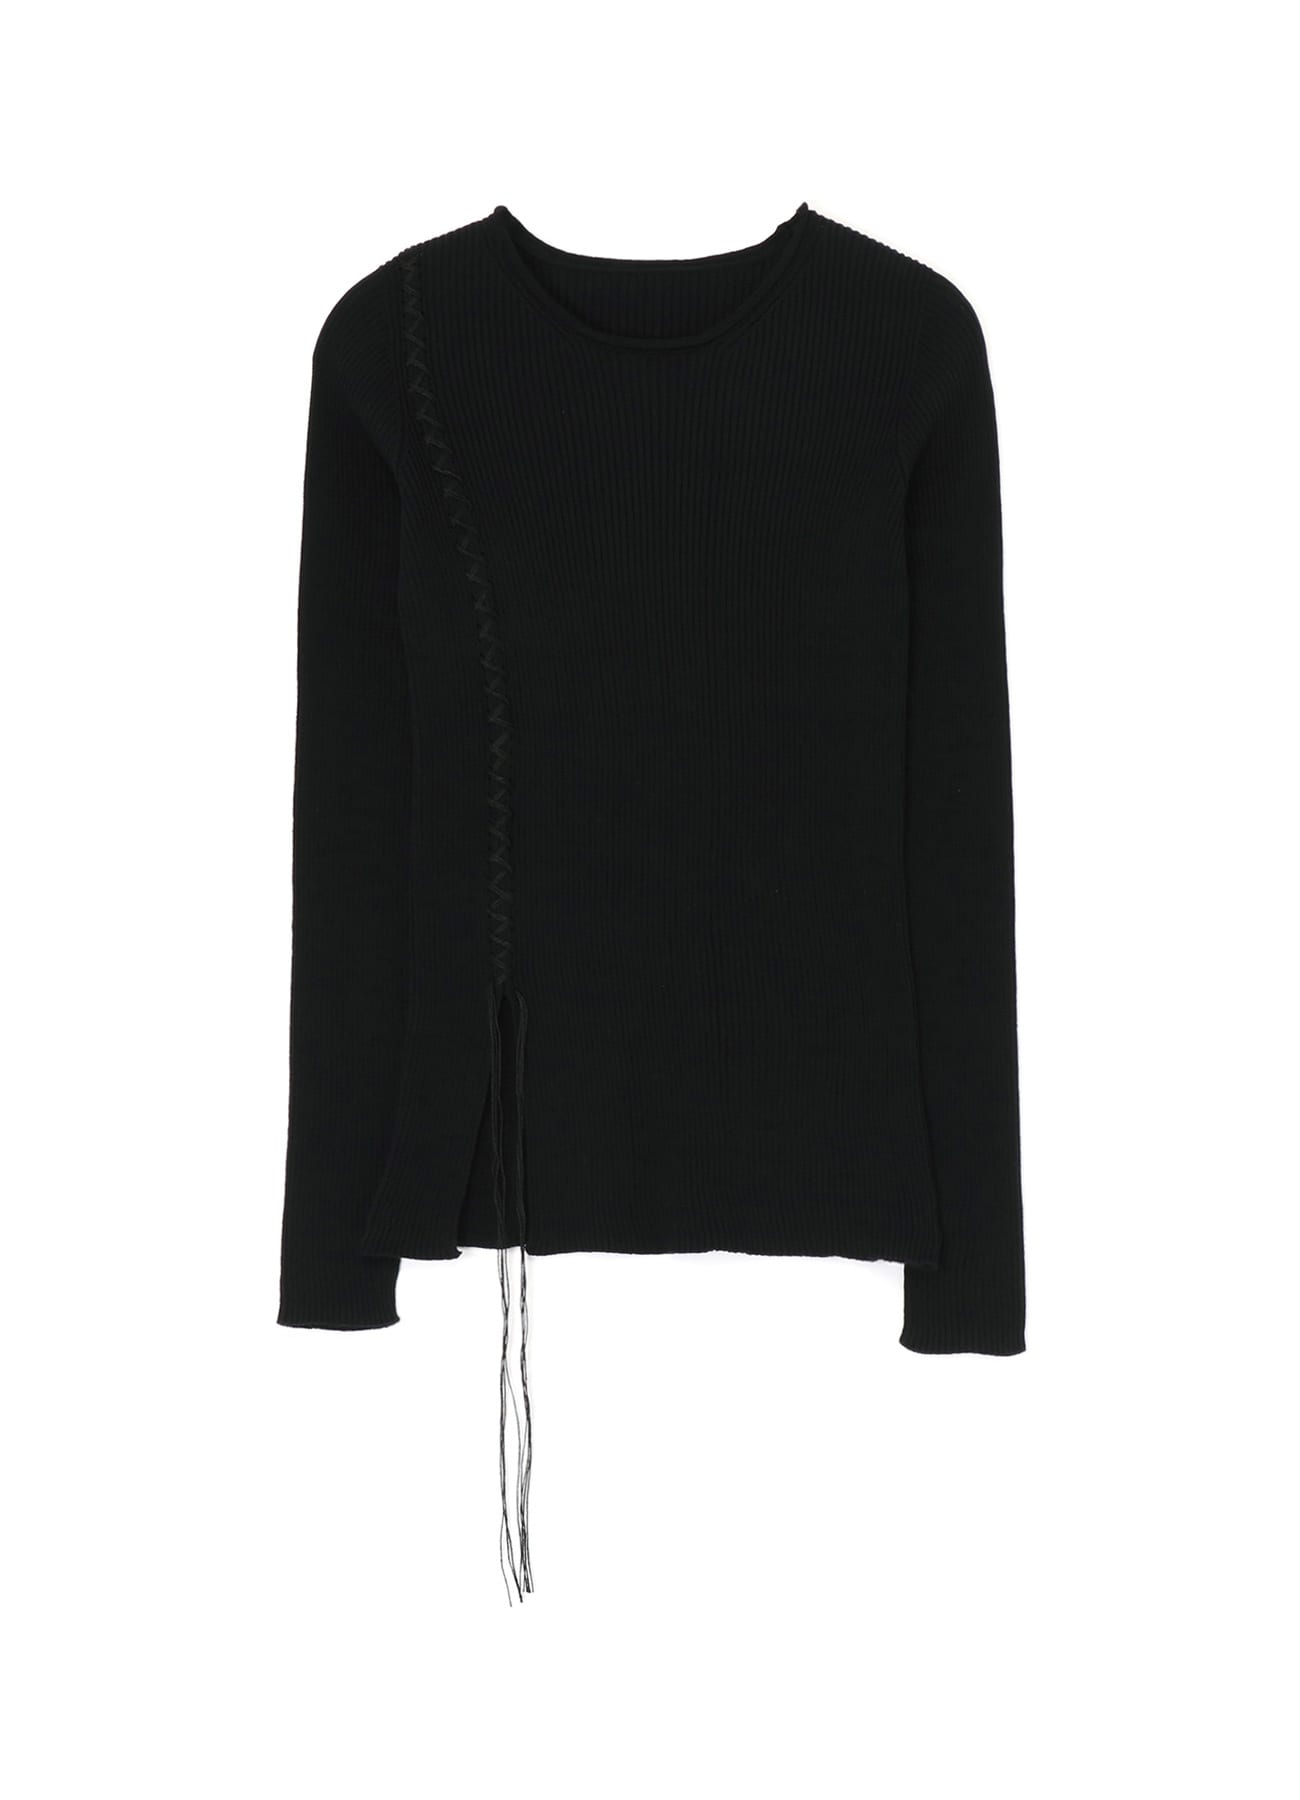 LACED UP LONG SLEEVE ROUND NECK RIBBED KNIT